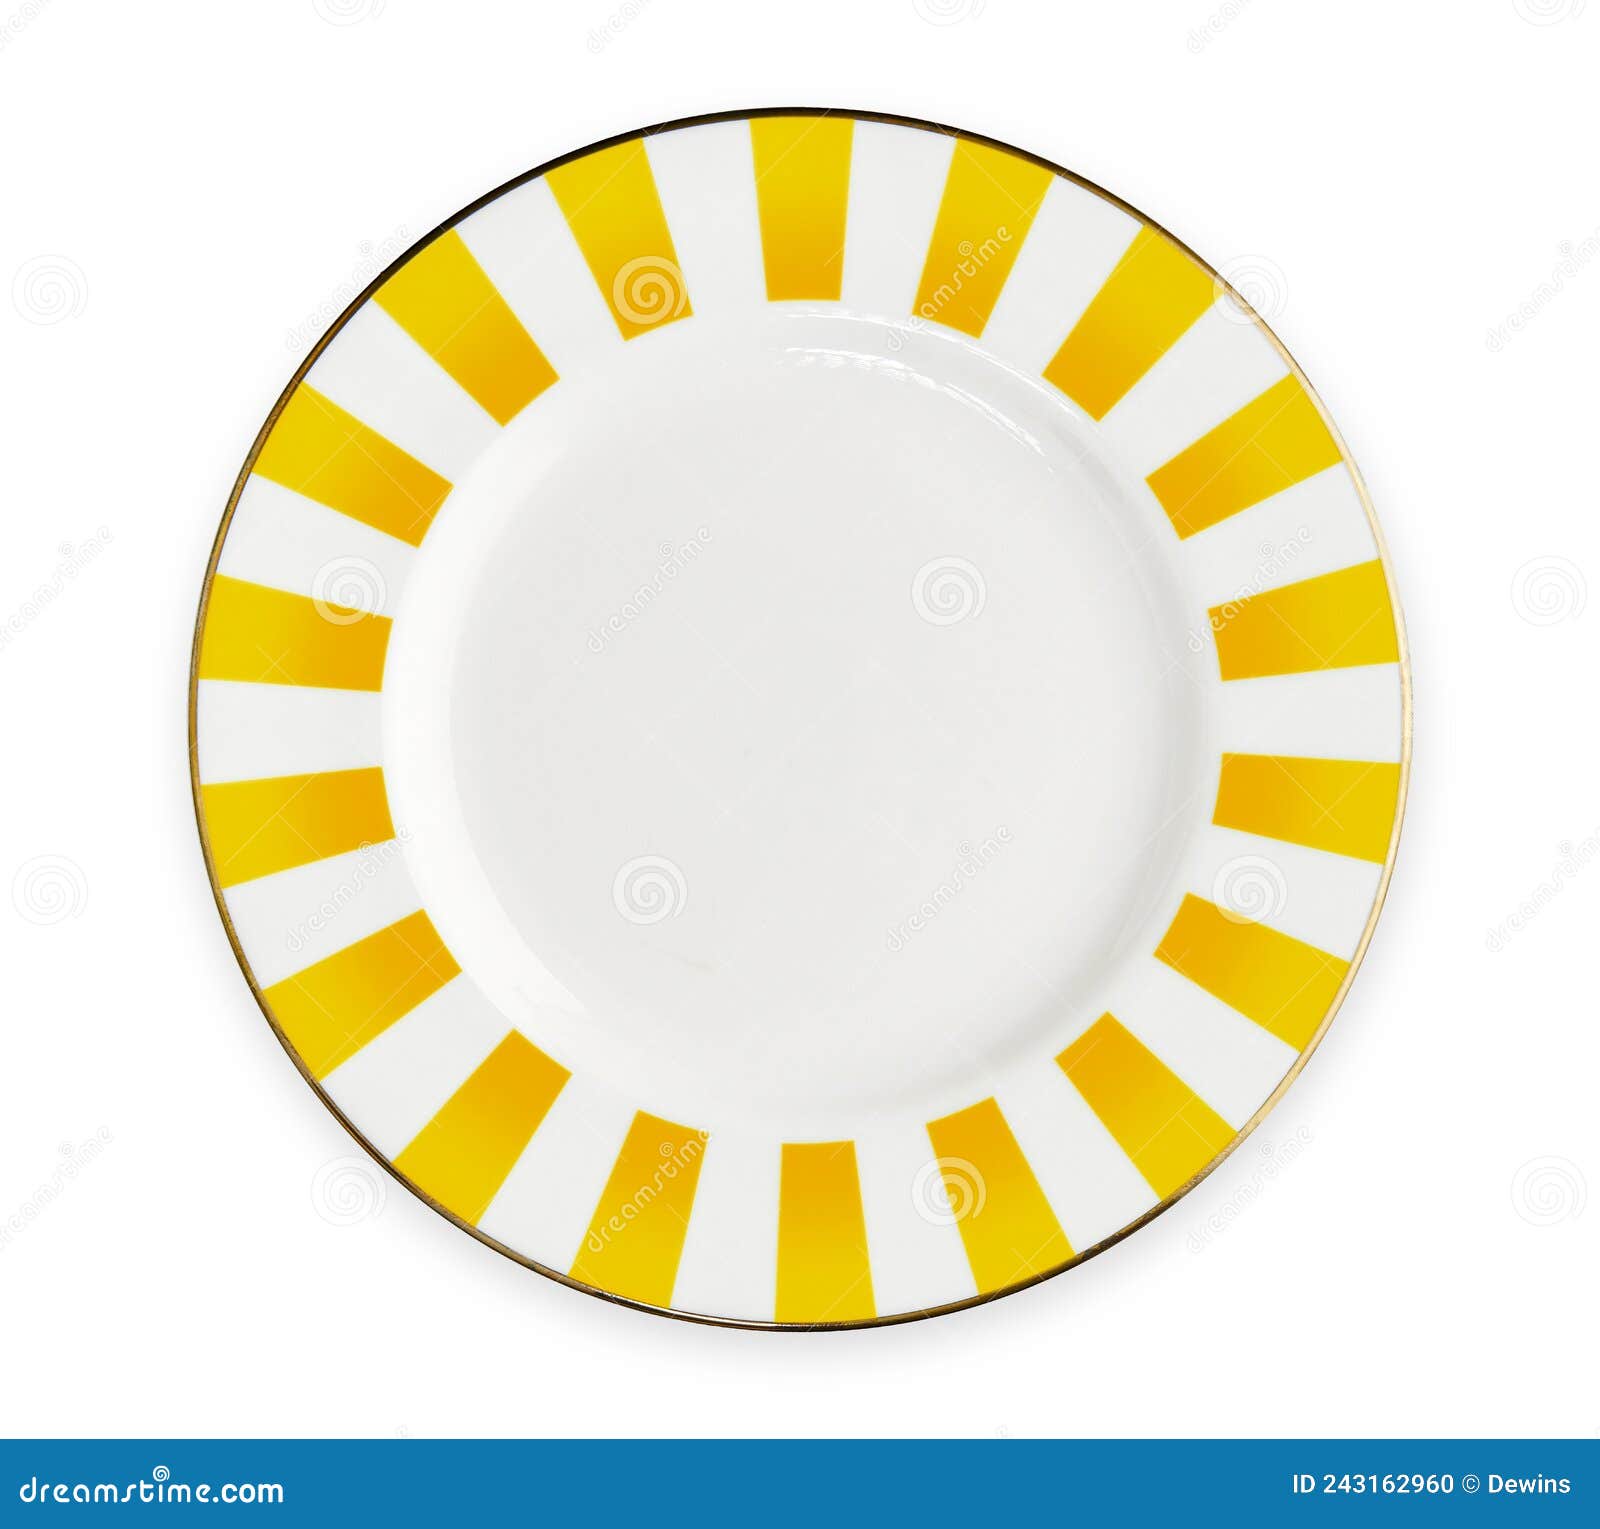 white plate with yellow rim,  on white background with clipping path, top view